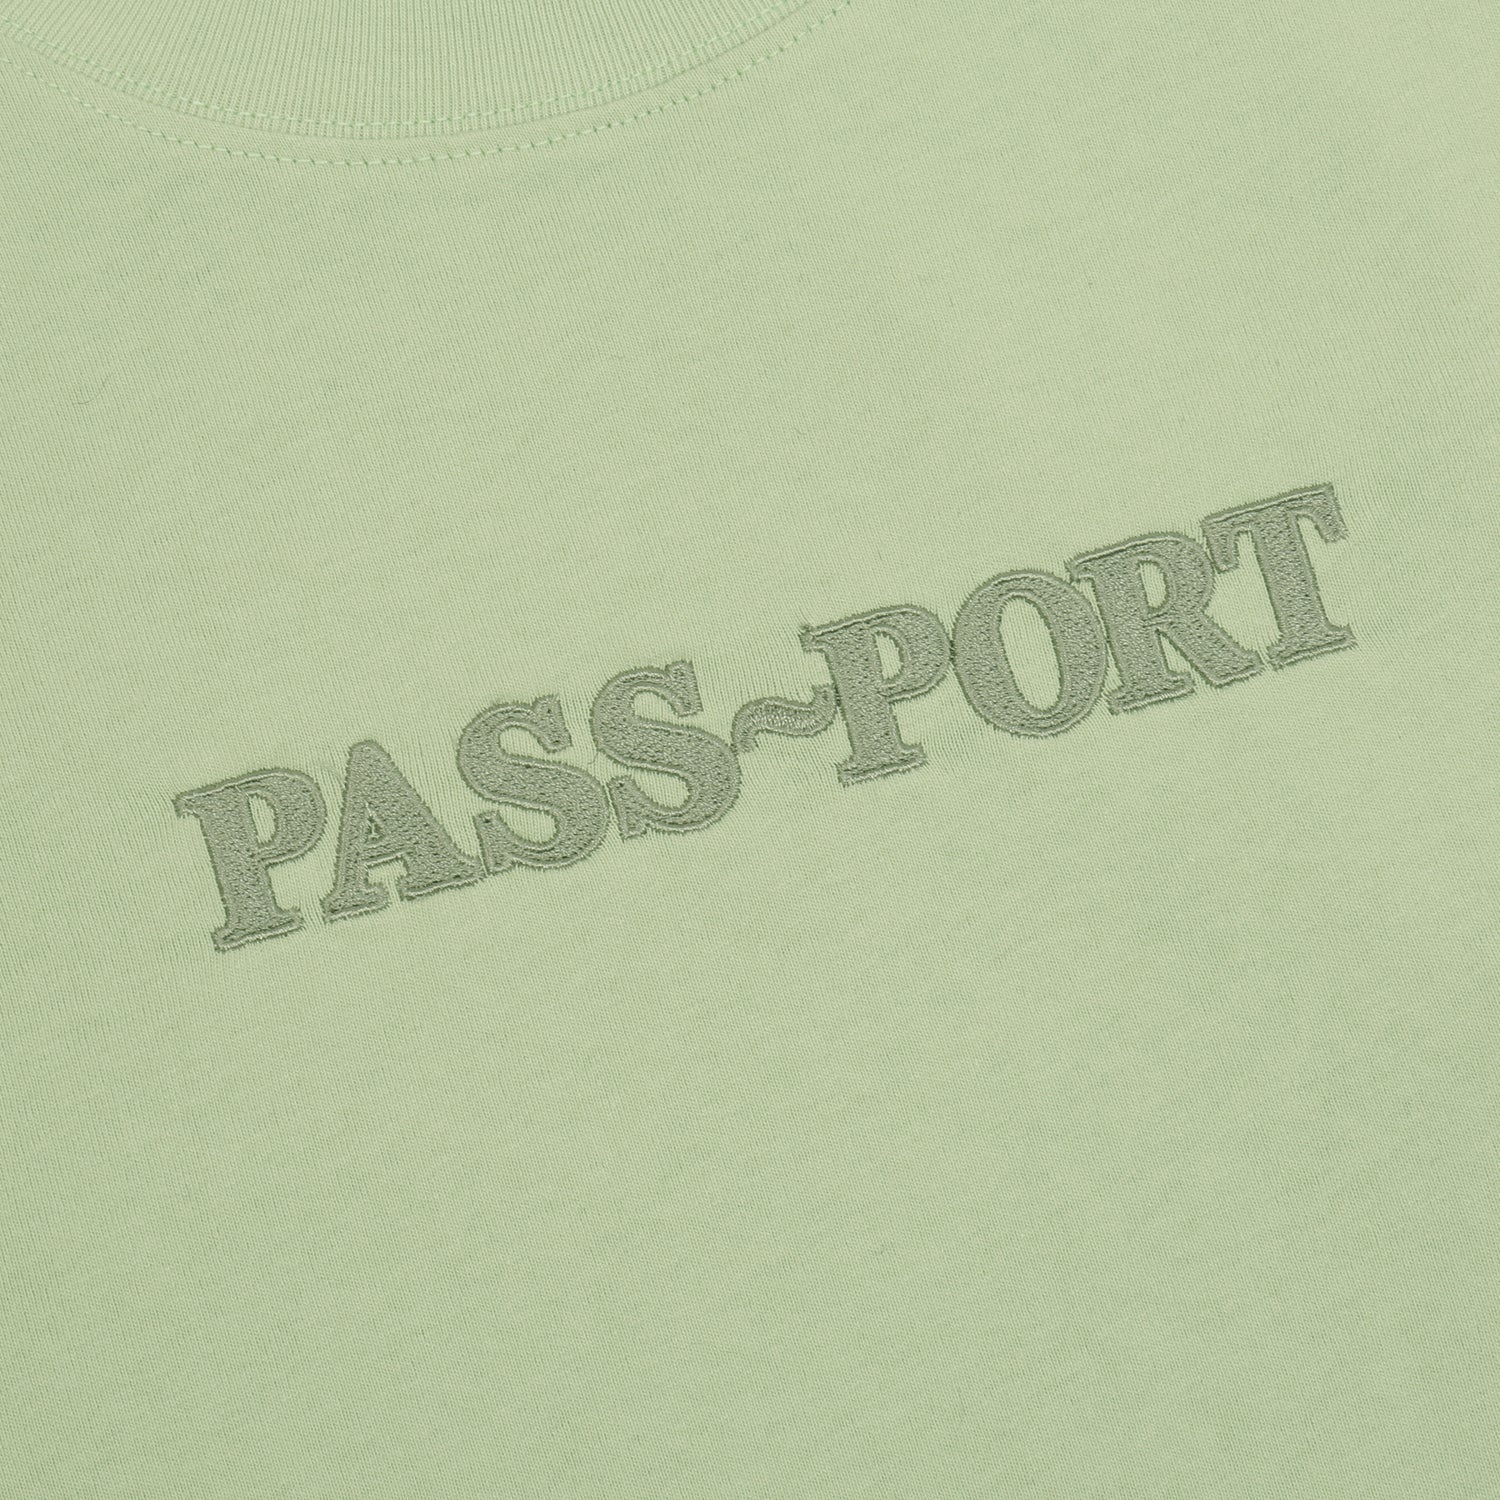 PASS~PORT "OFFICIAL EMBROIDERY" TEE STONEWASH GREEN